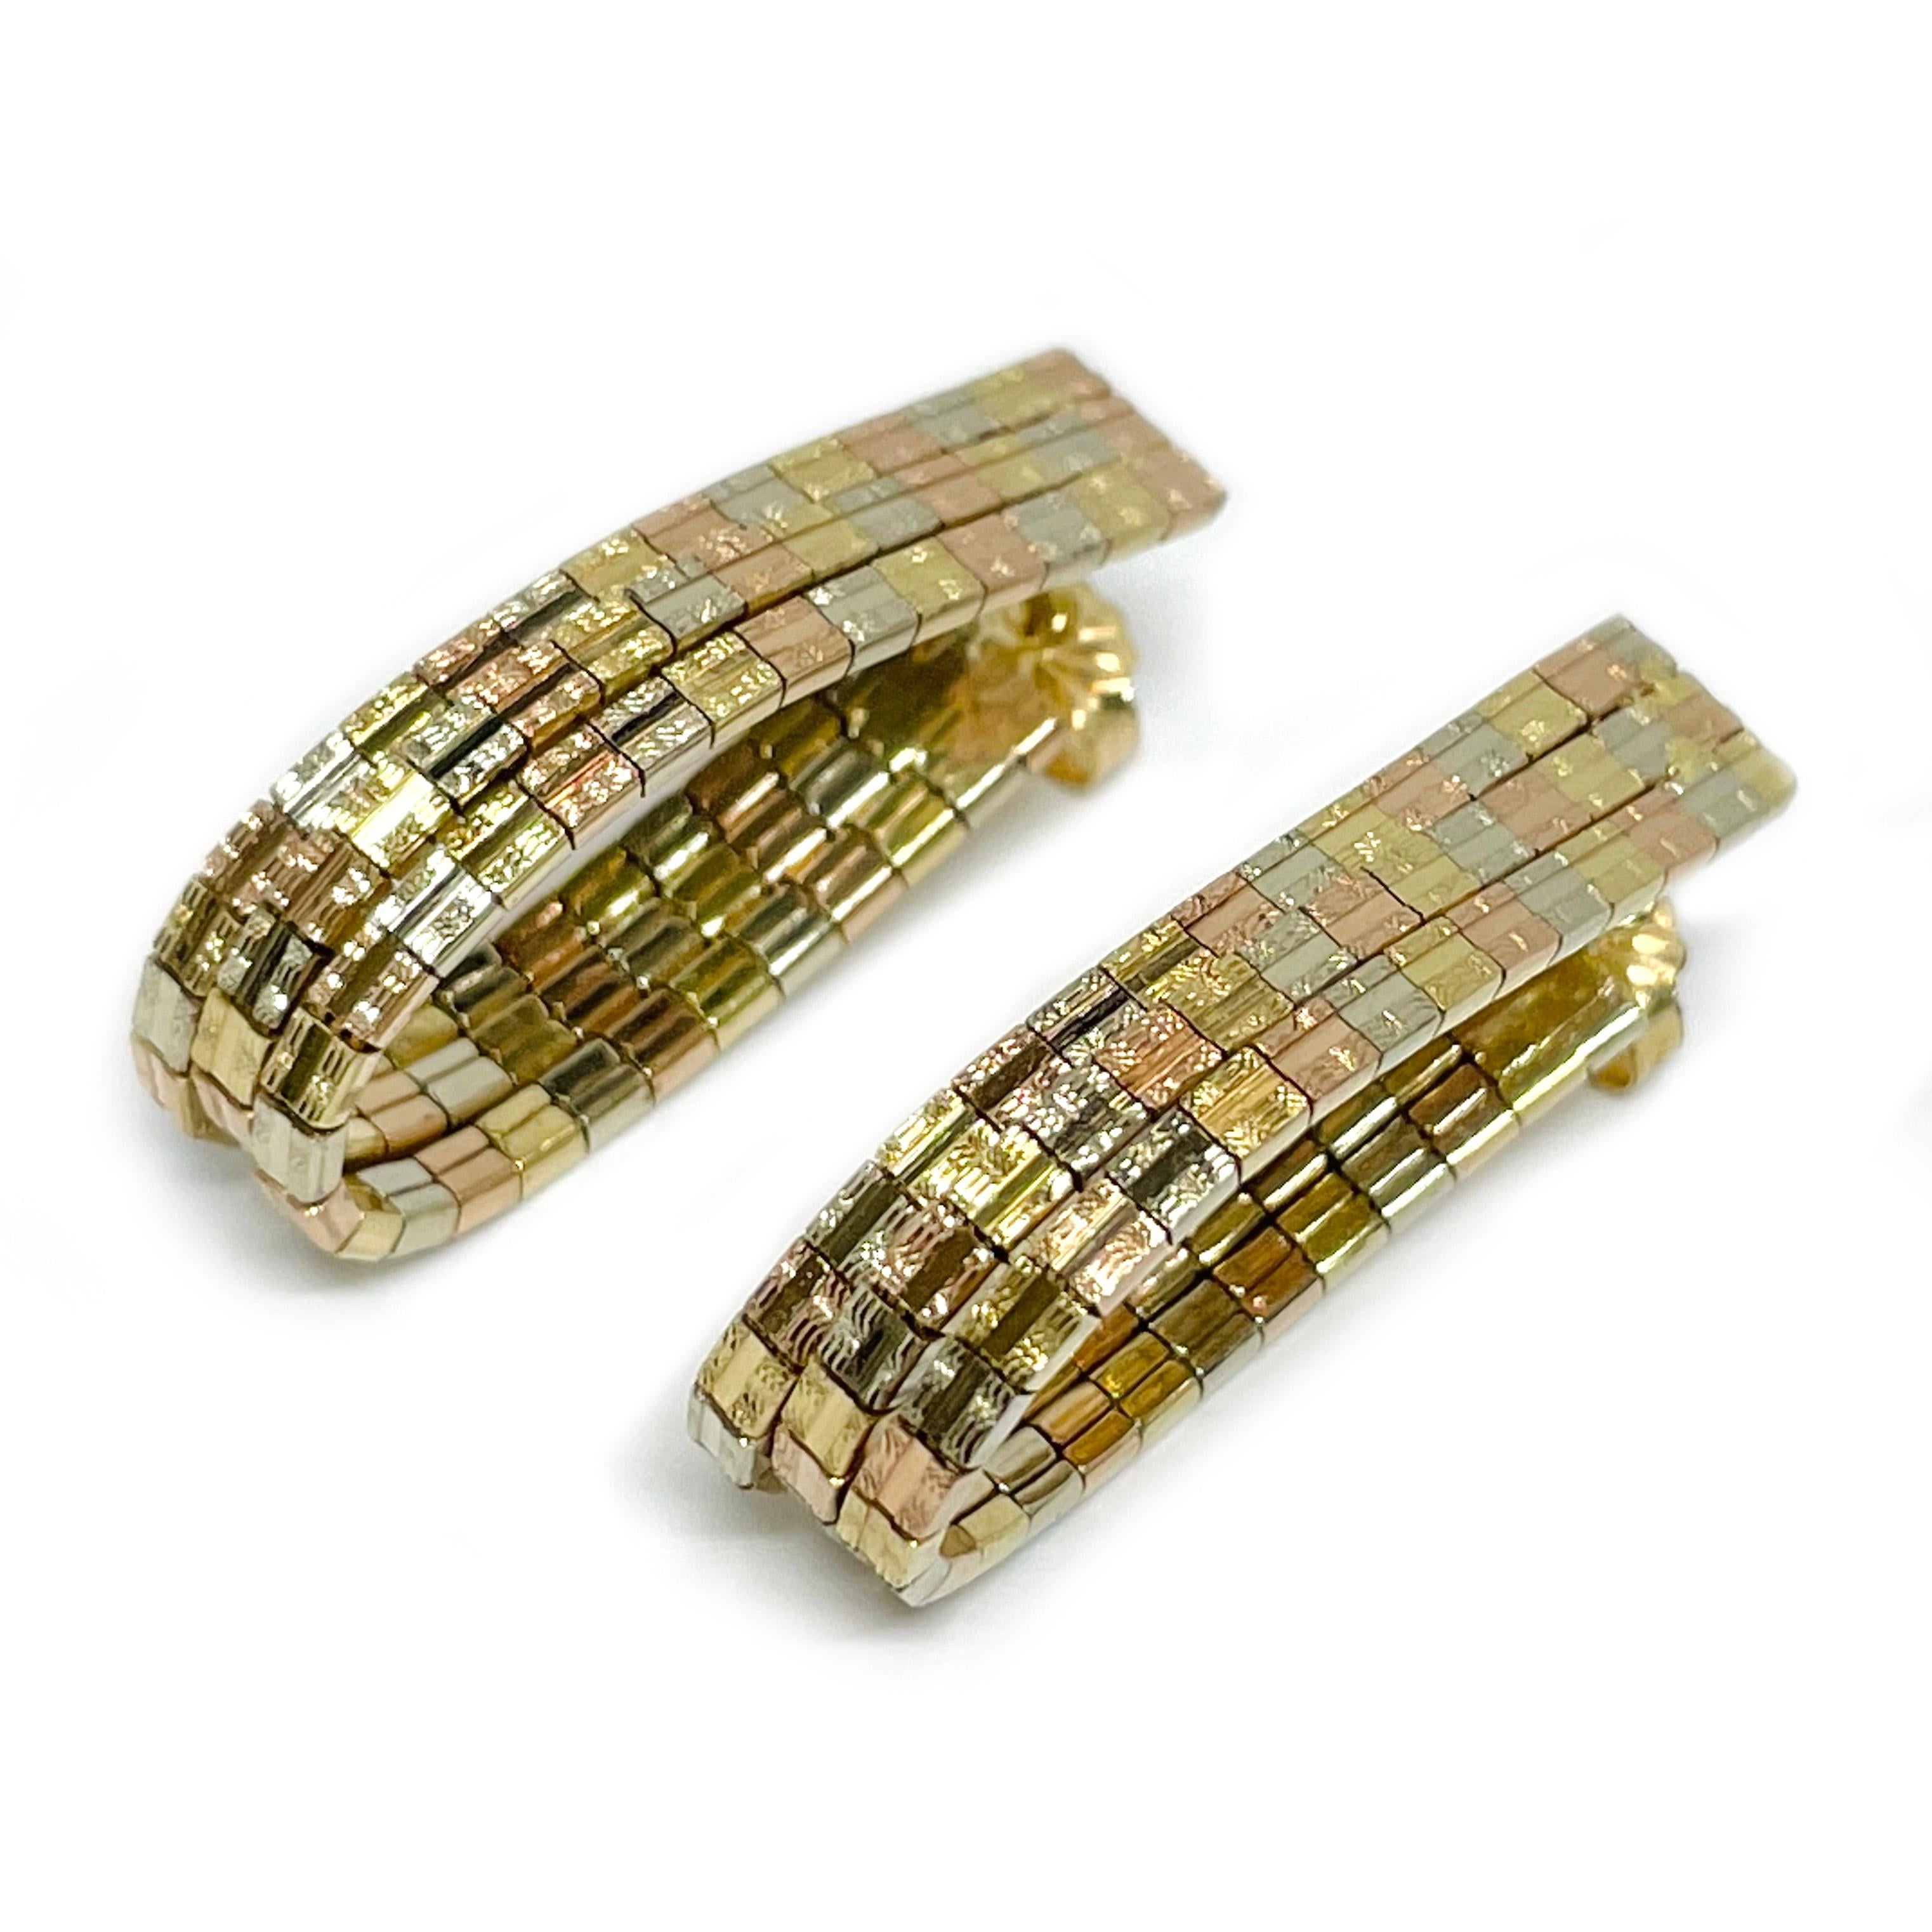 14 Karat Tri-Tone Diamond Cut Hoop Earrings. Super sparkly unique three strand hoop earrings. The earrings feature rose, white, and yellow gold flexible stands that are held in a hoop shape with a butterfly earring back. These would be great for